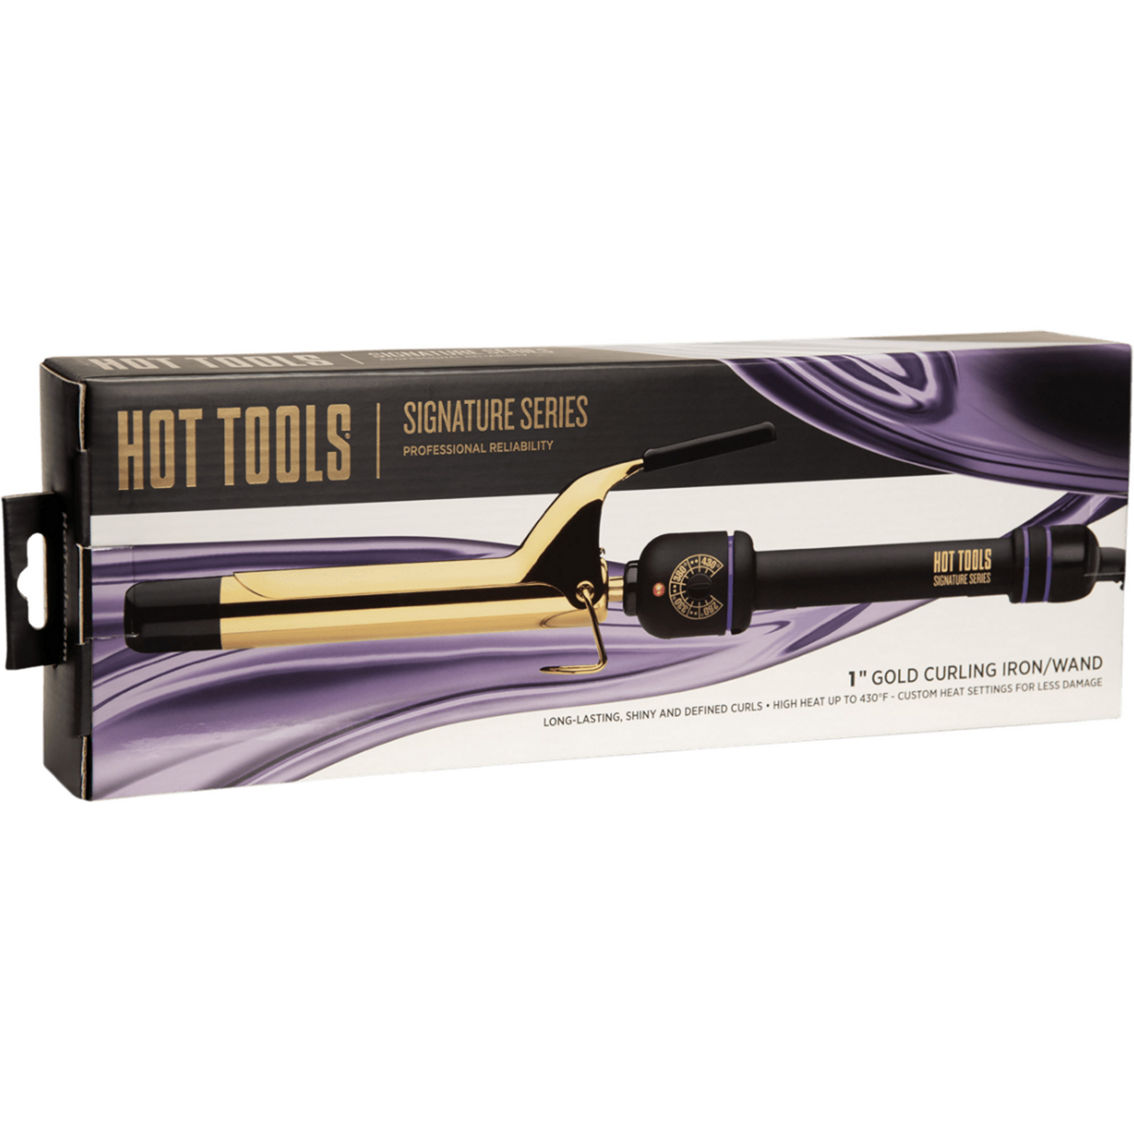 Hot Tools Signature Series 1 in. Gold Curling Iron Wand - Image 5 of 5